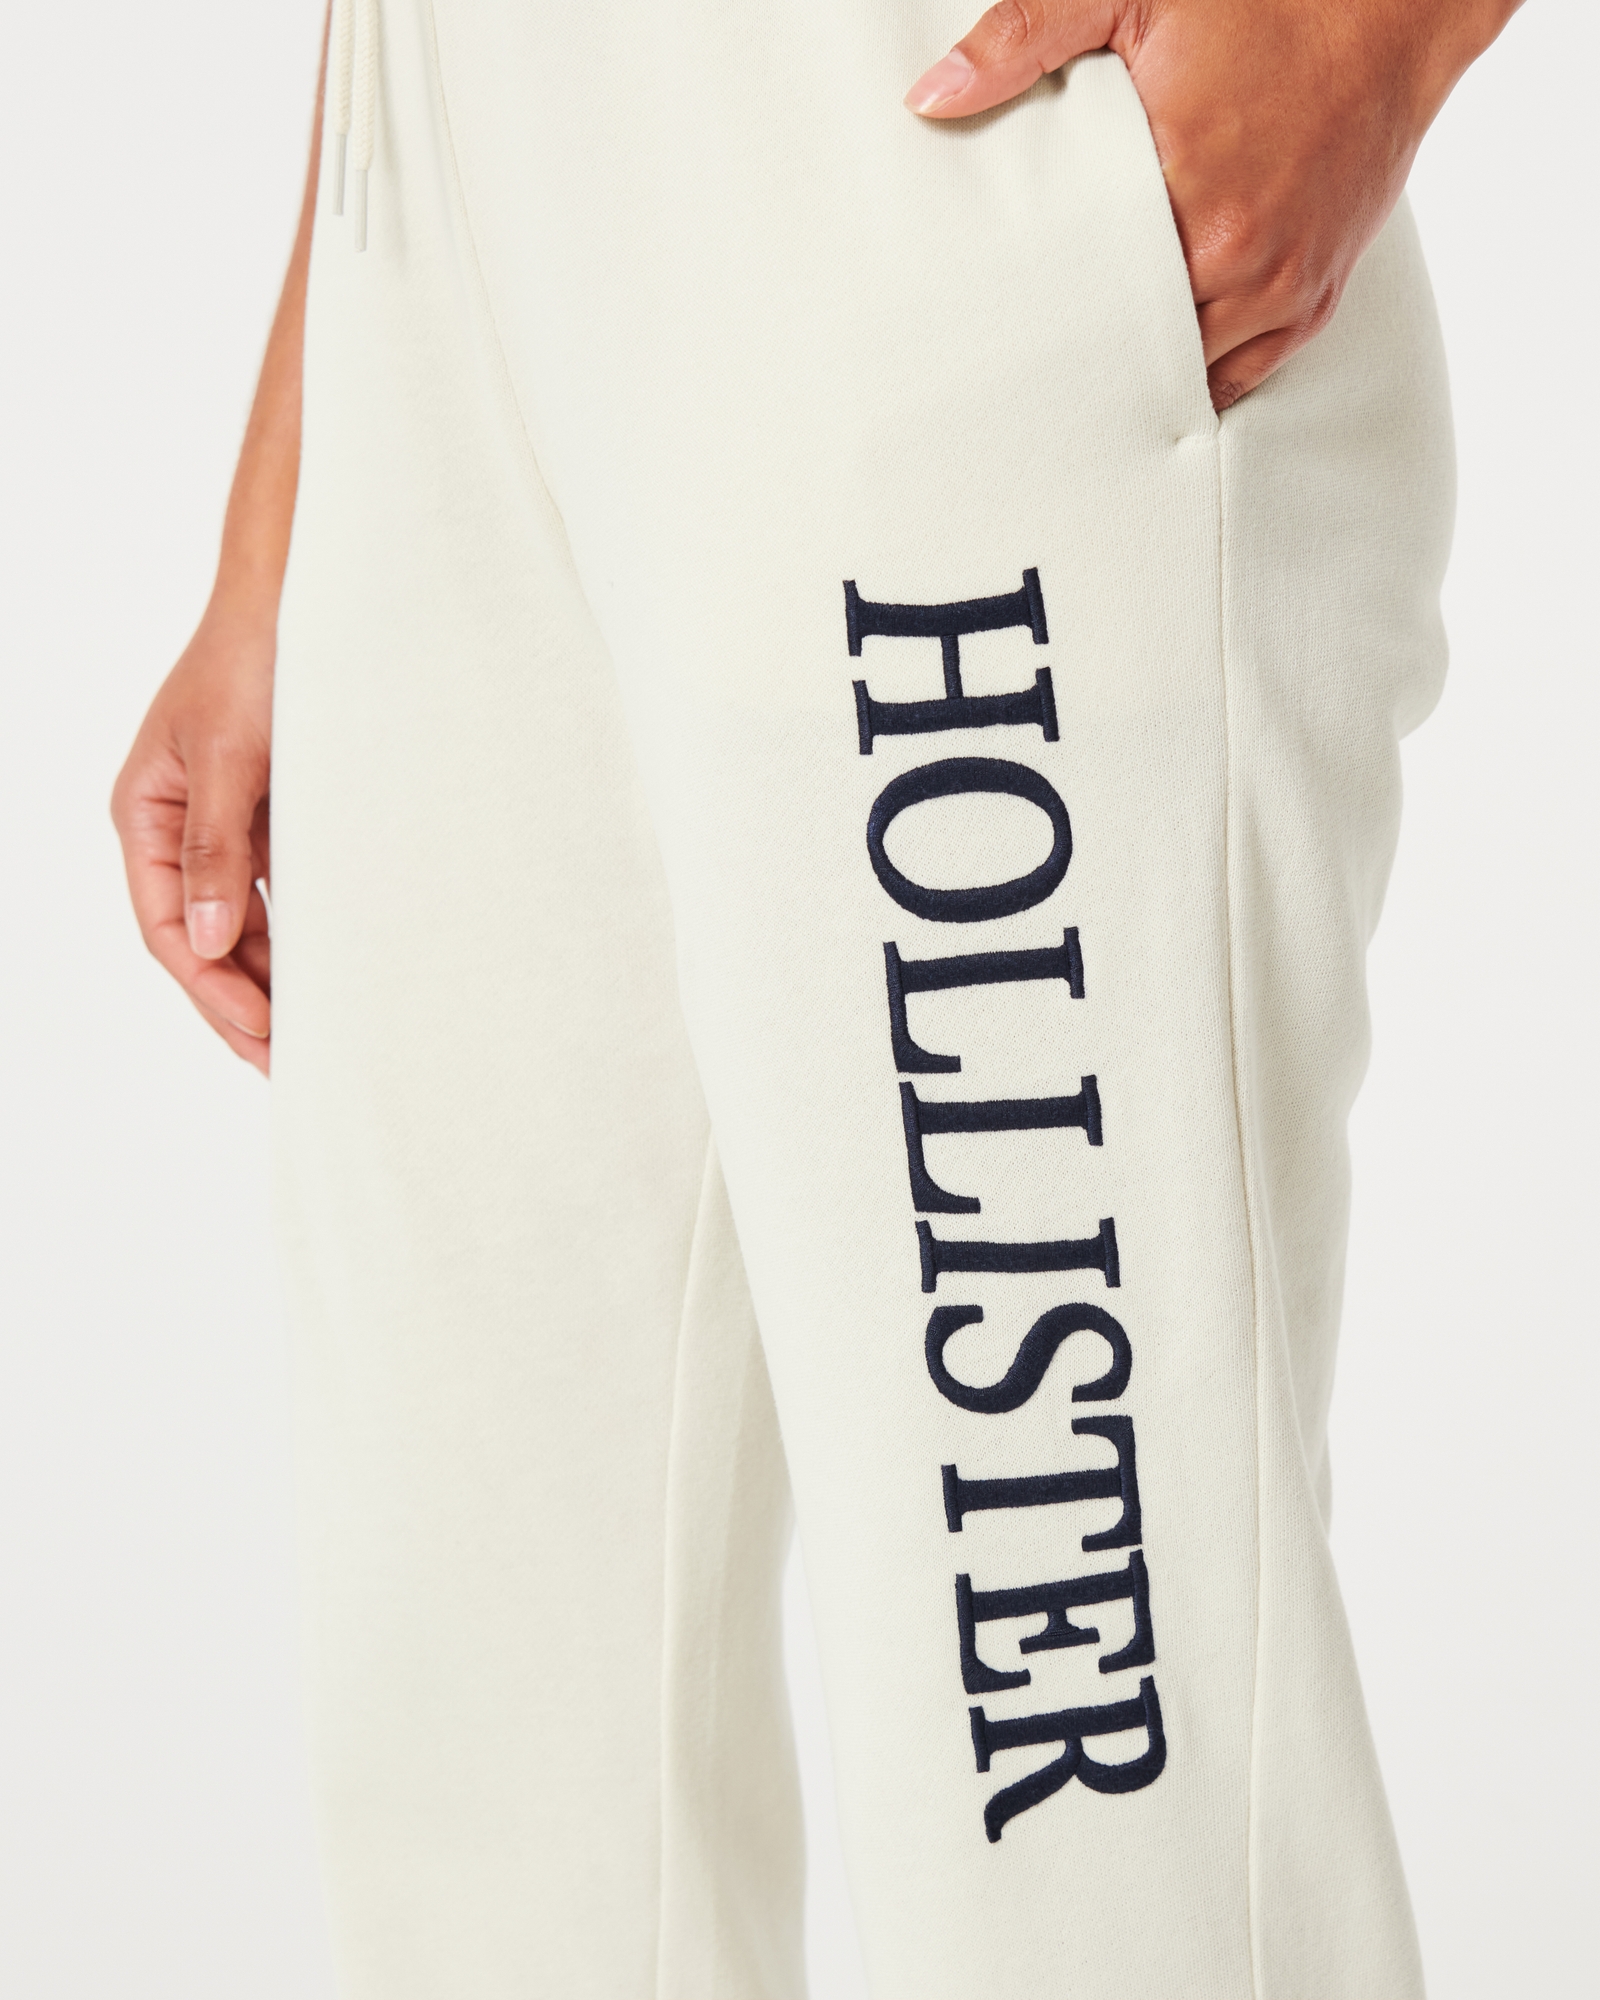 https://img.hollisterco.com/is/image/anf/KIC_347-3073-0896-178_model4.jpg?policy=product-extra-large